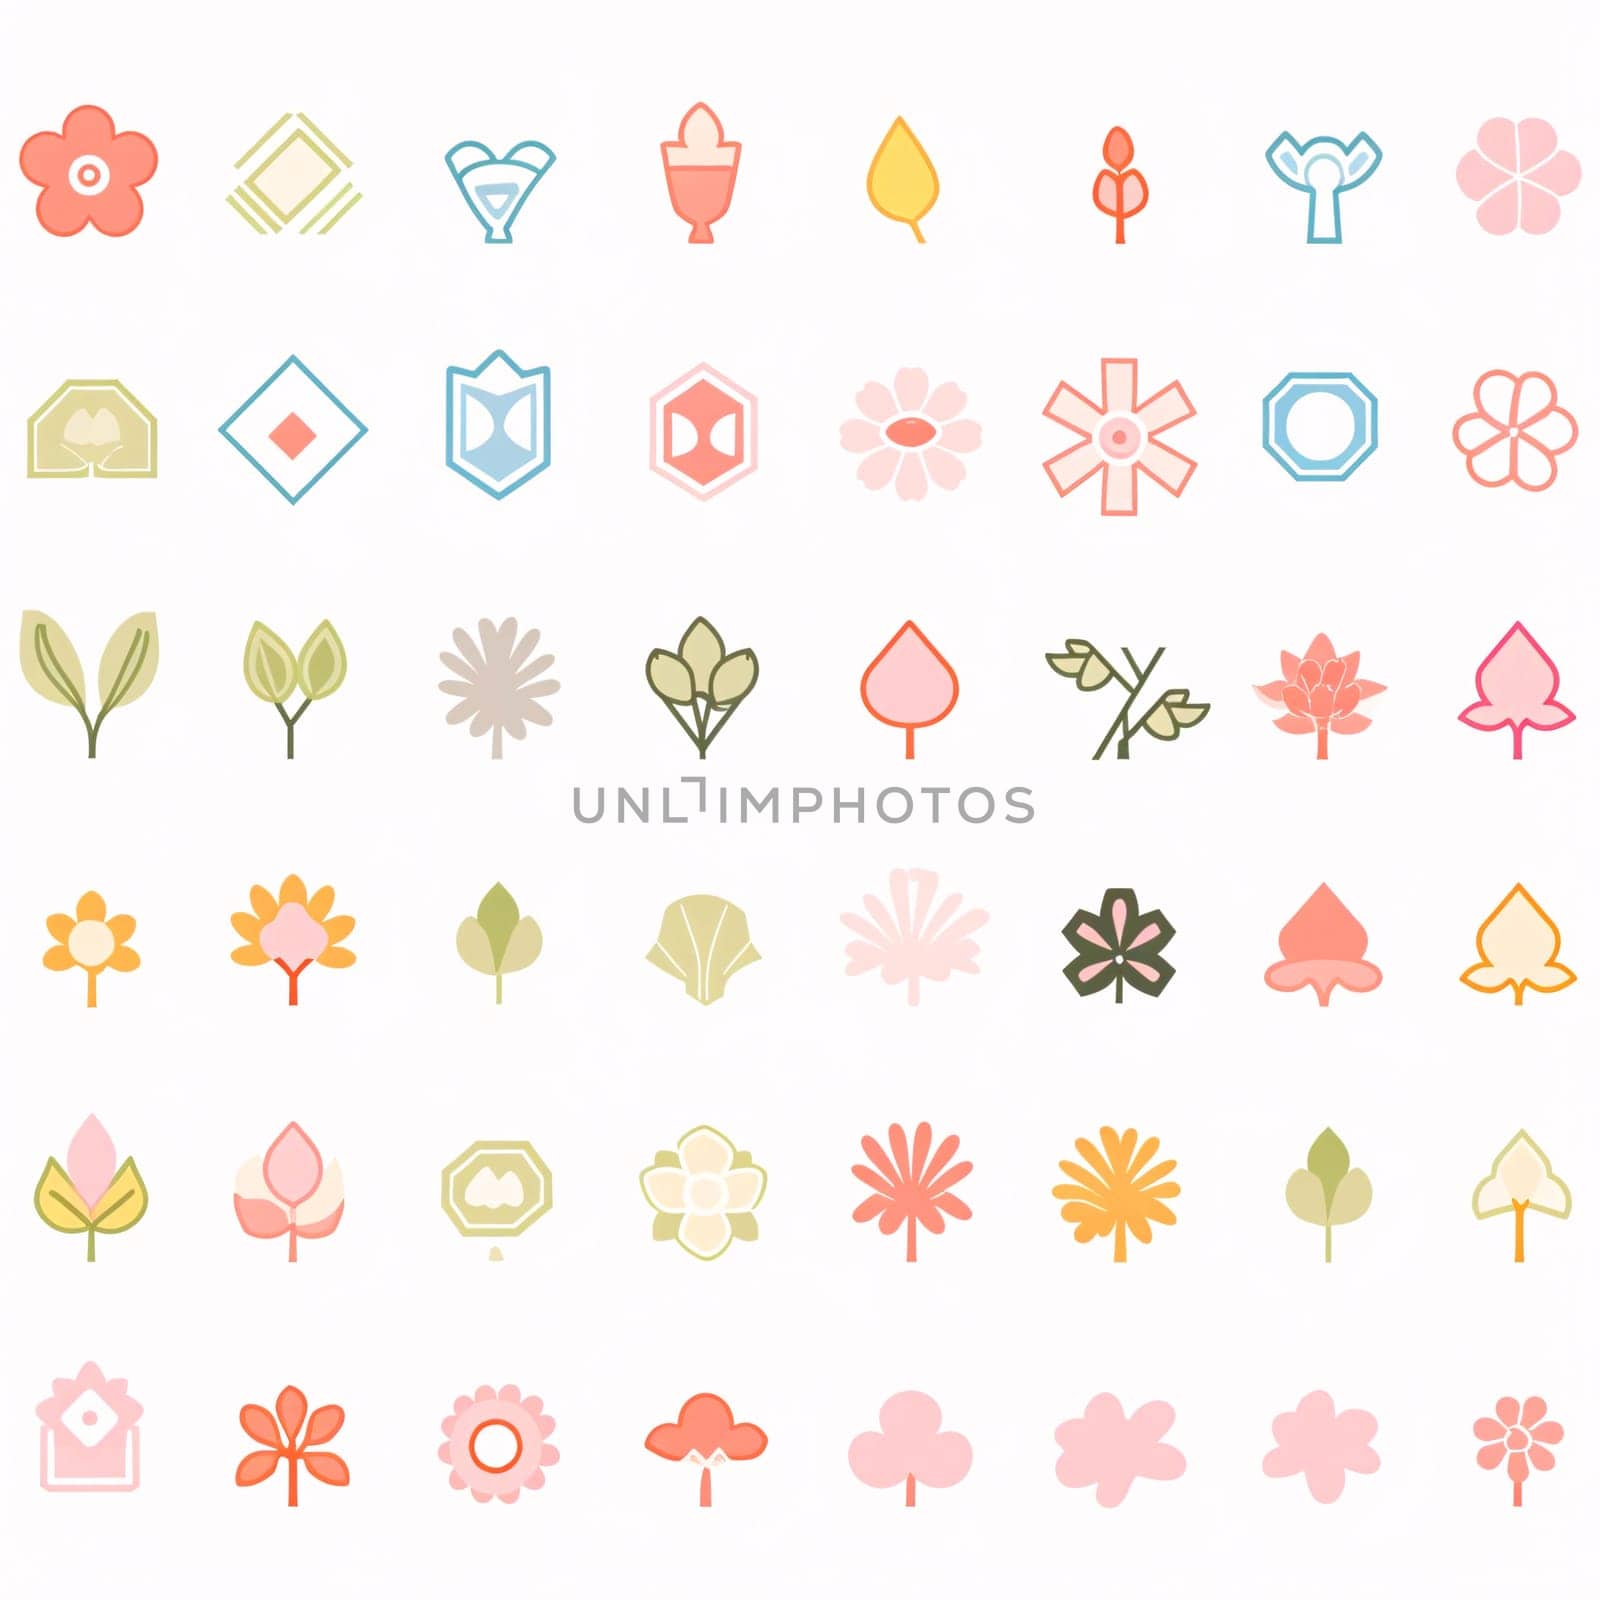 New icons collection: Flower icon set. Collection of floral icons. Vector illustration.